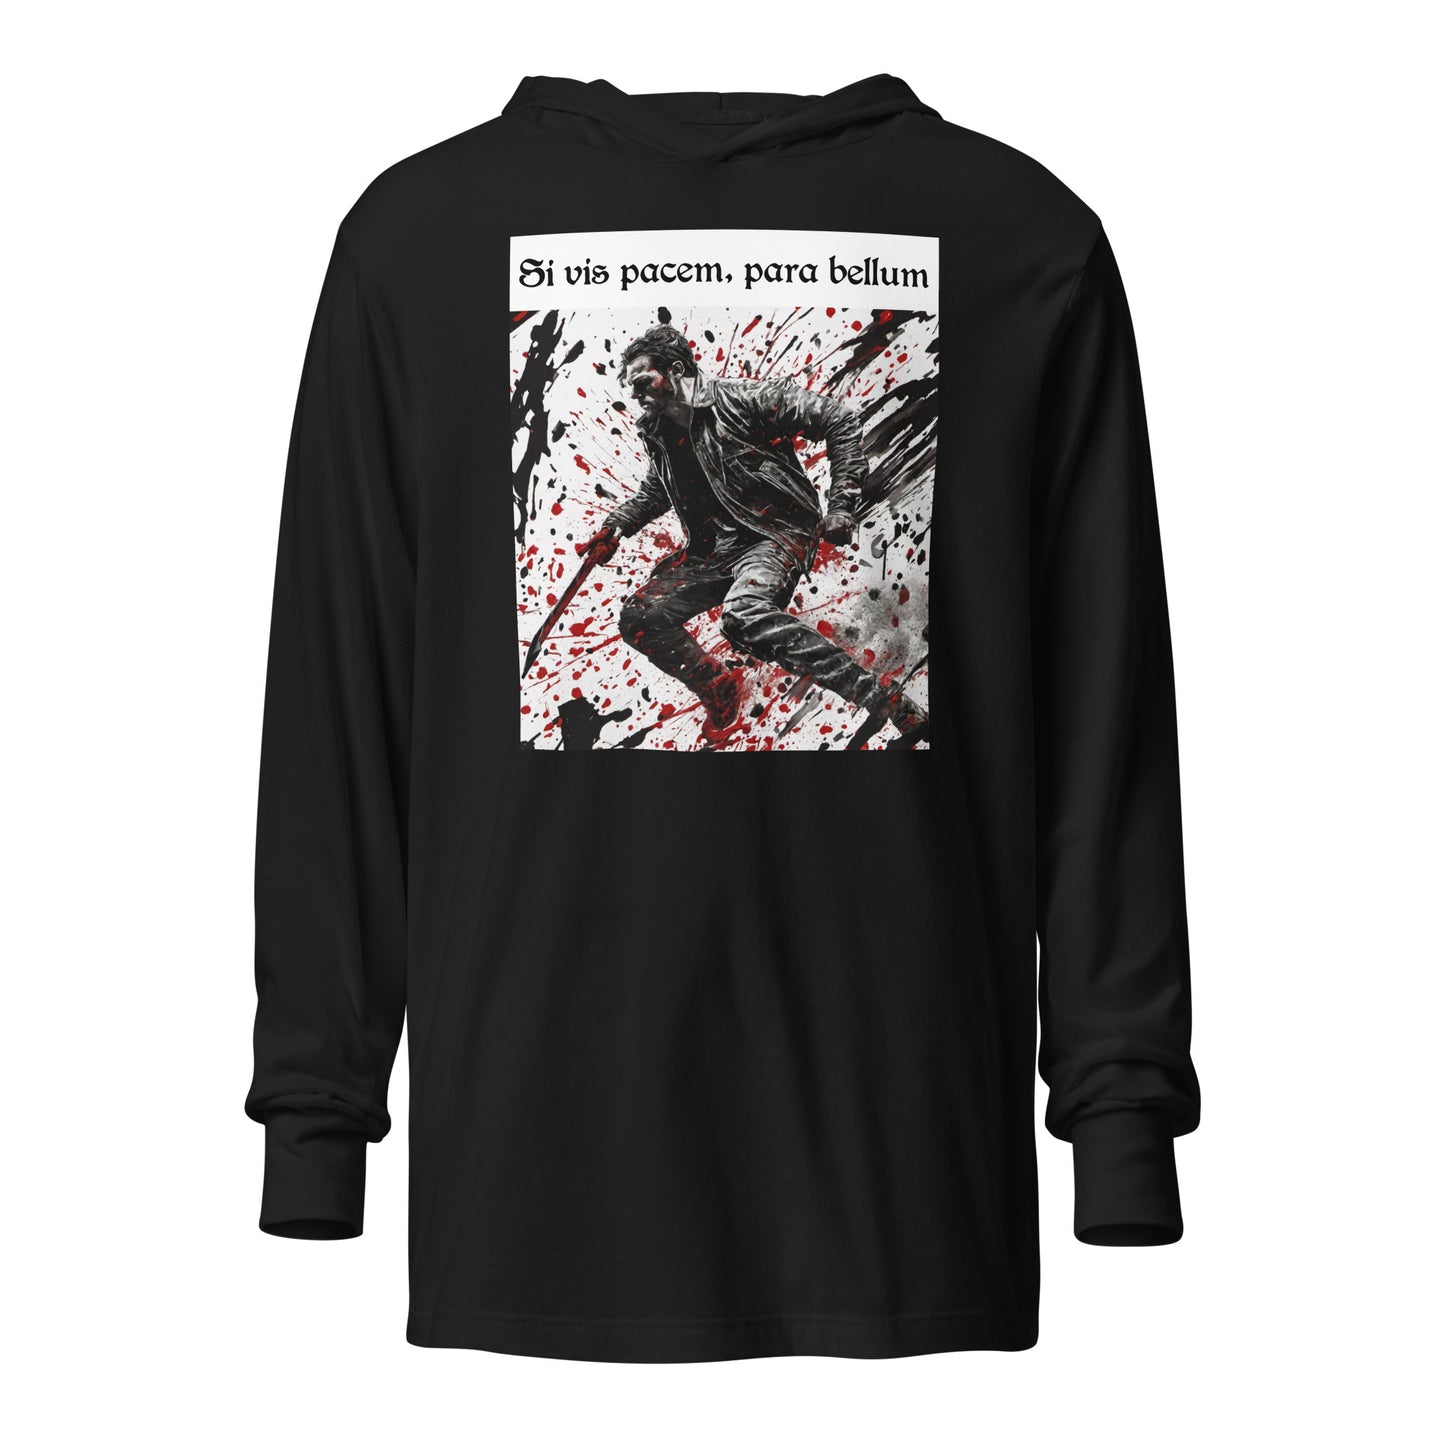 If You Want Peace, Prepare for War Men's Hooded Long-Sleeve Tee Black